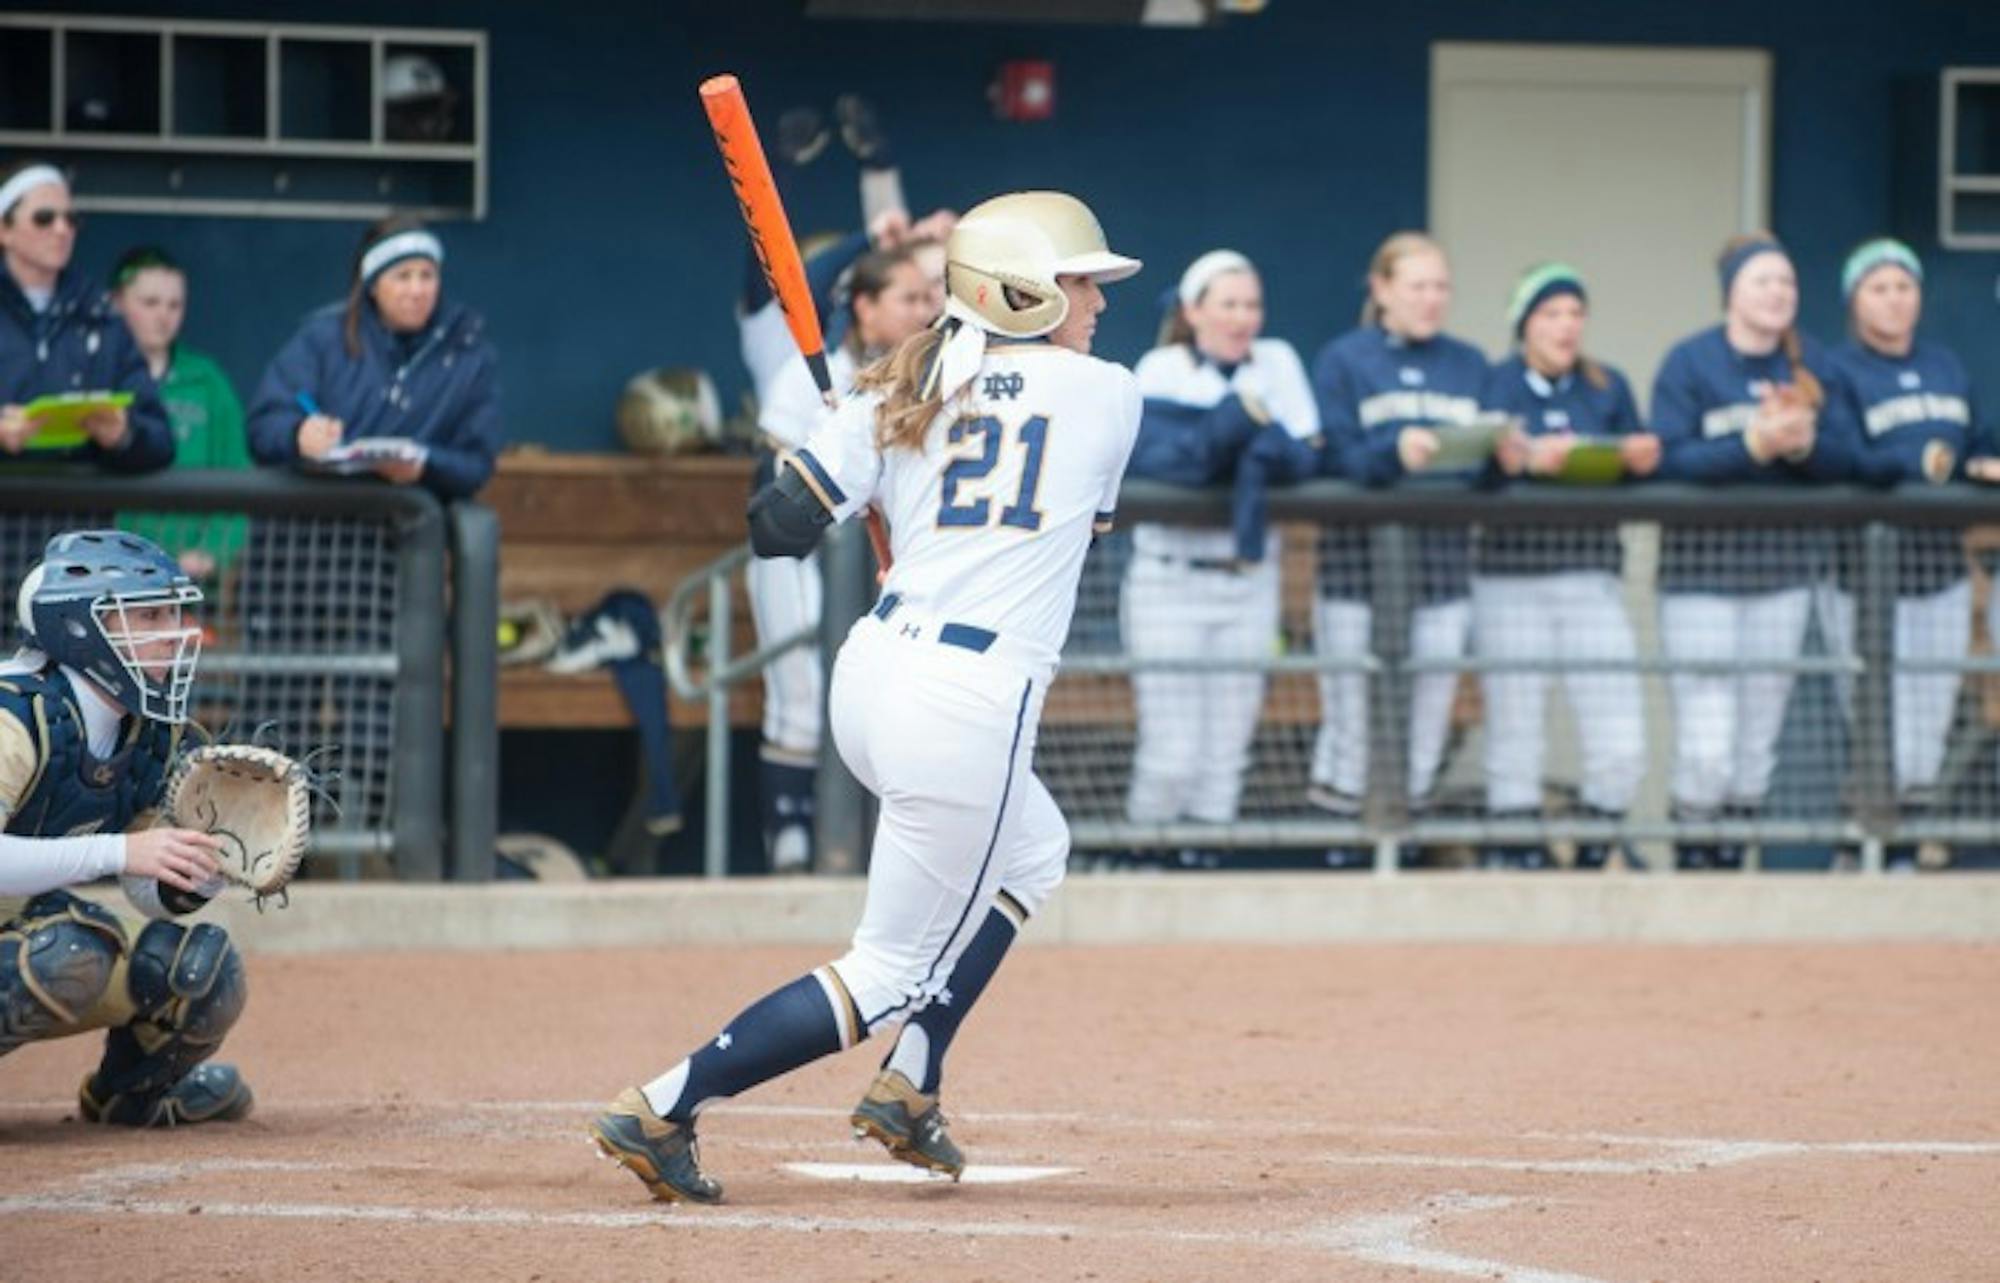 Sophomore outfielder Karley Wester takes off after putting the ball in play during Notre Dame’s 6-1 win over Georgia Tech on March 21.